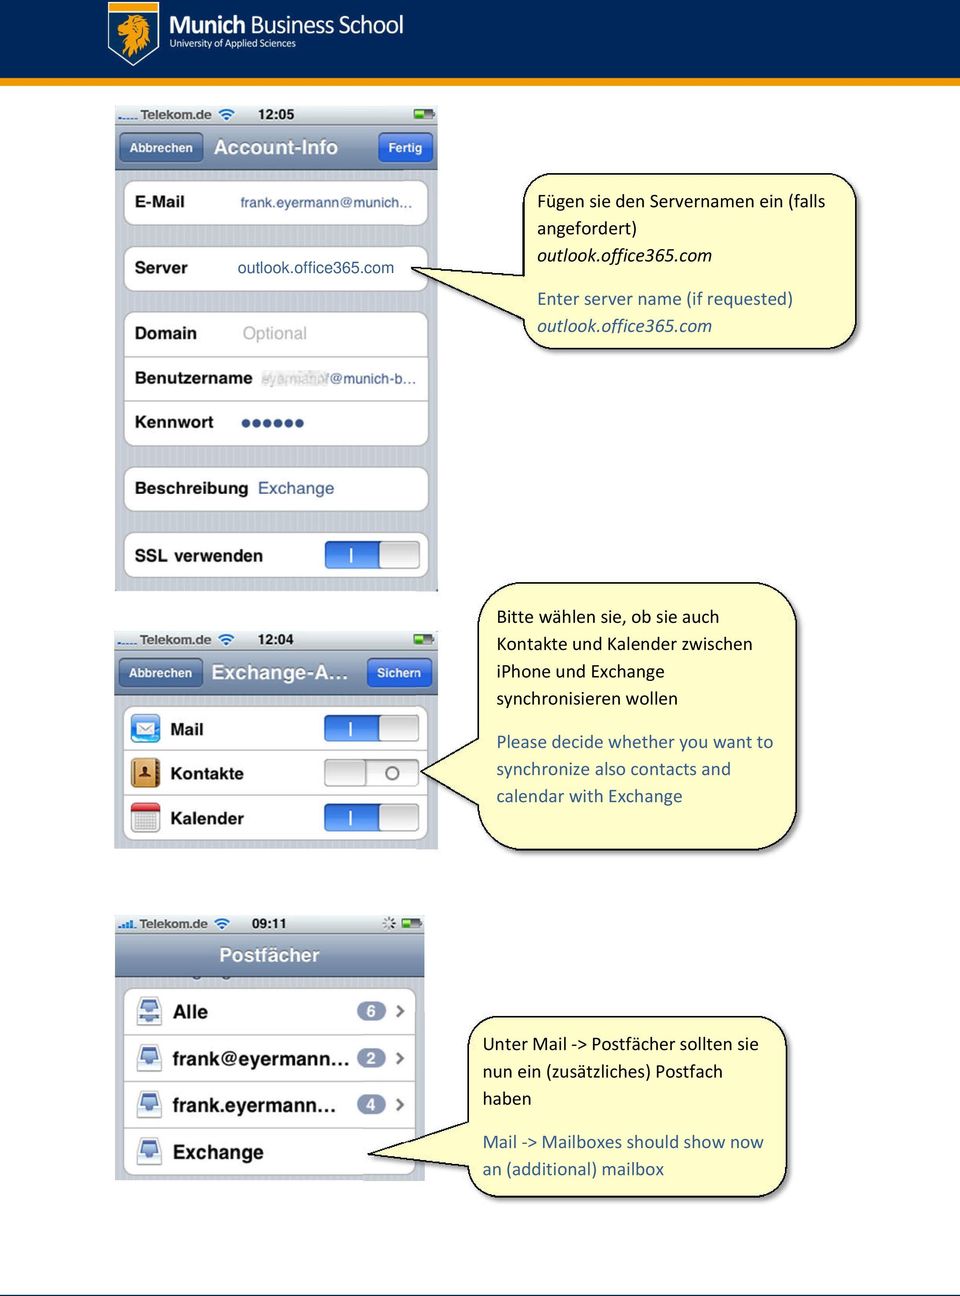 whether you want to synchronize also contacts and calendar with Exchange Unter Mail -> Postfächer